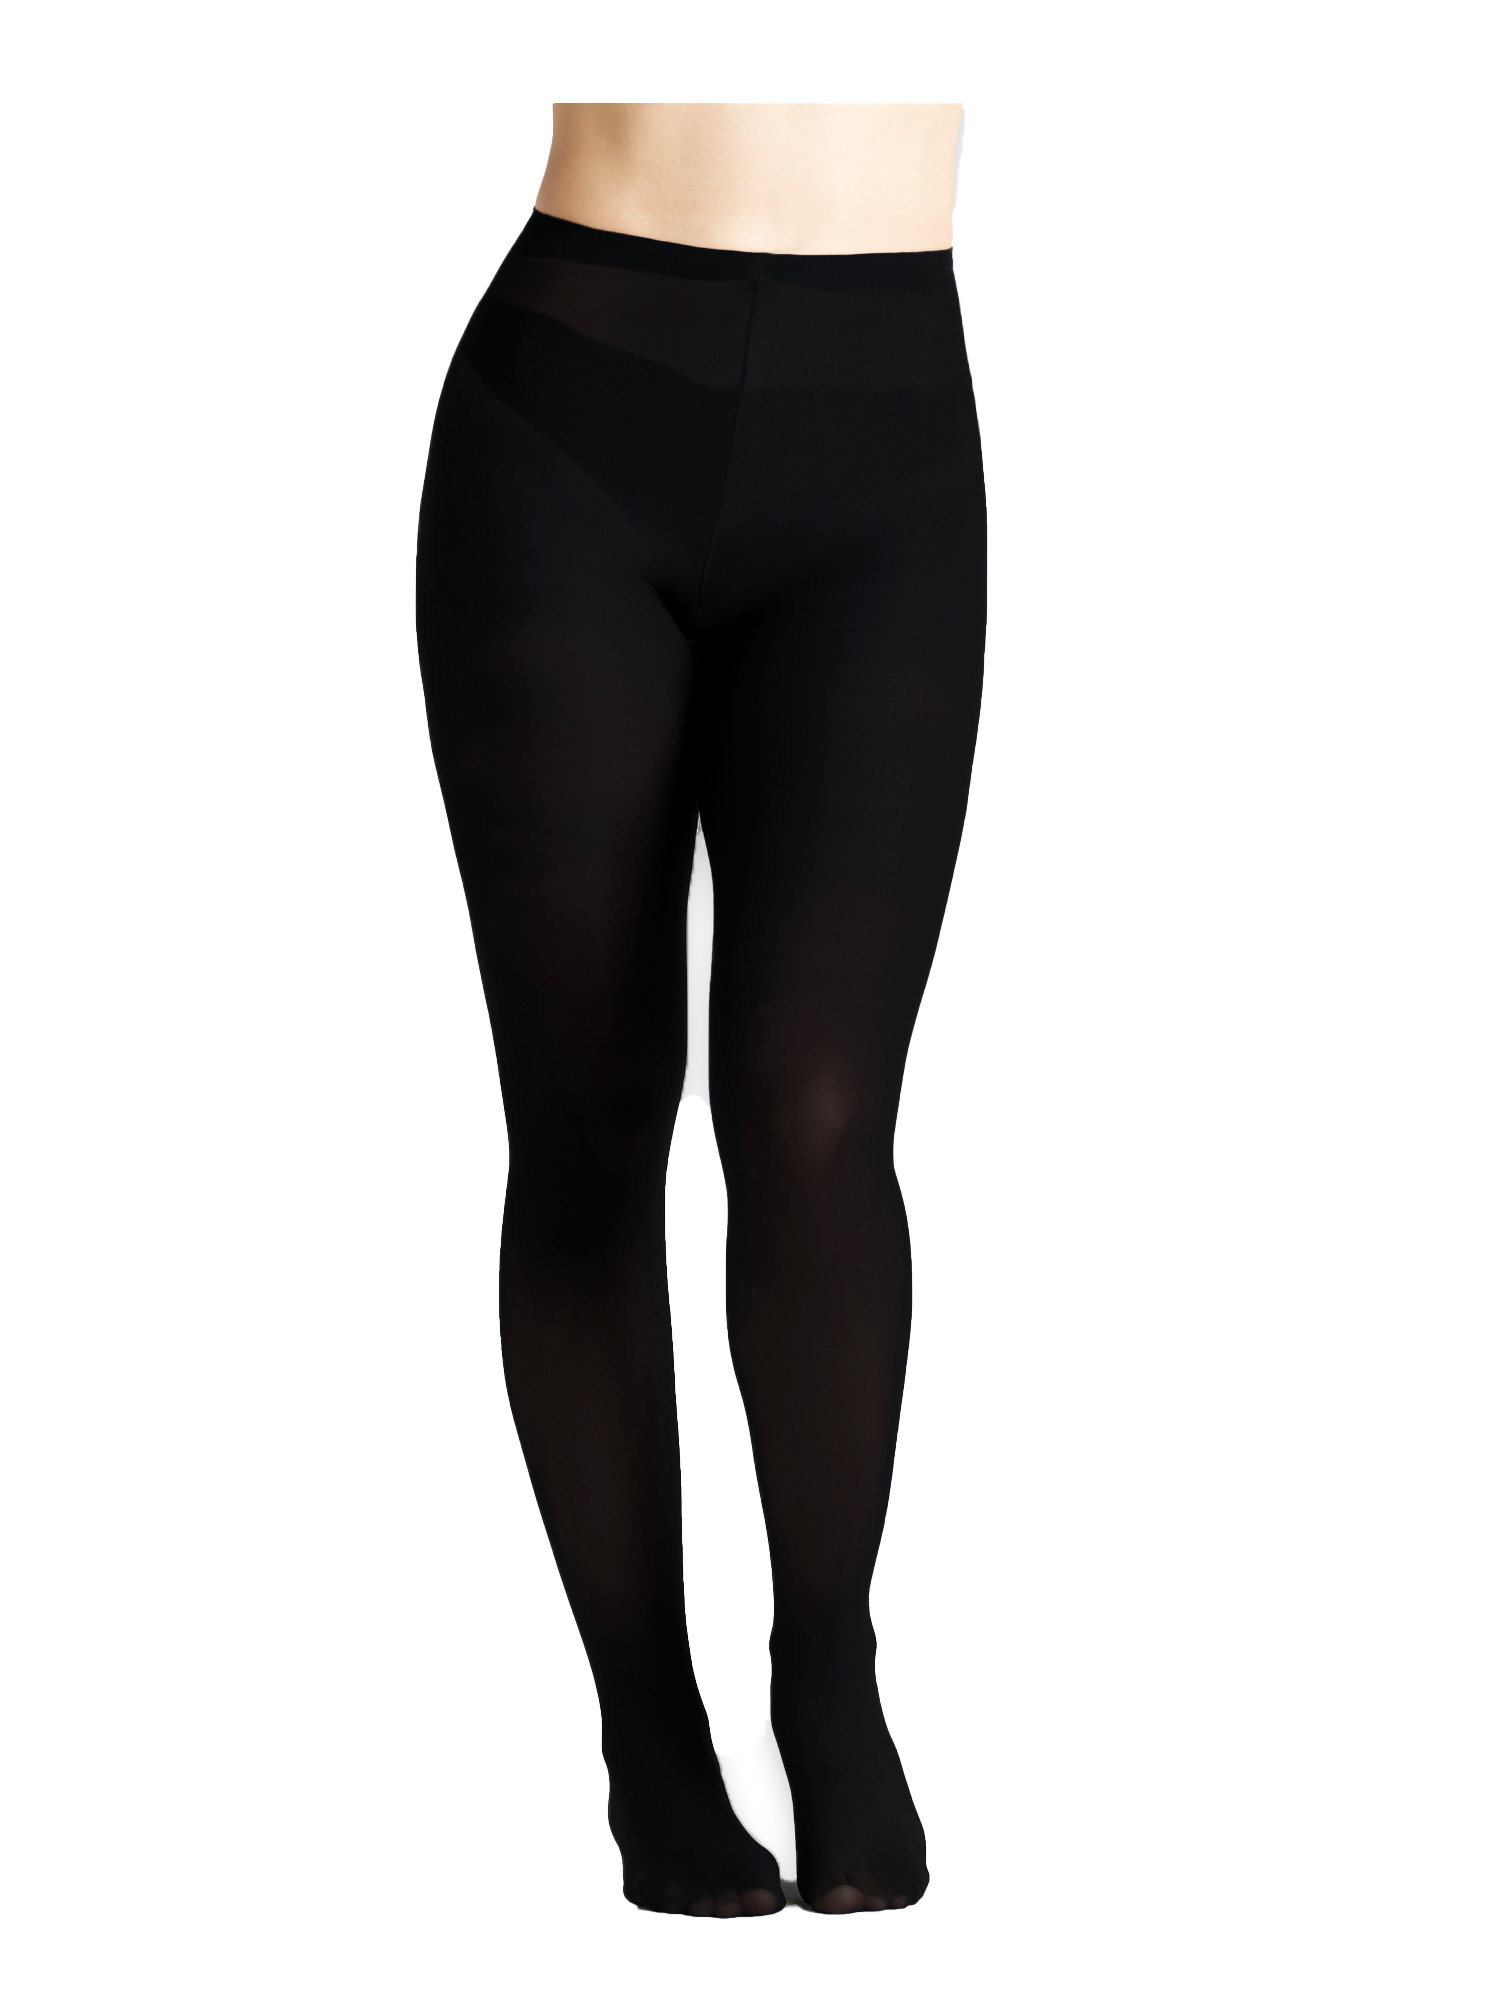 Classic Control Top Footed Tights